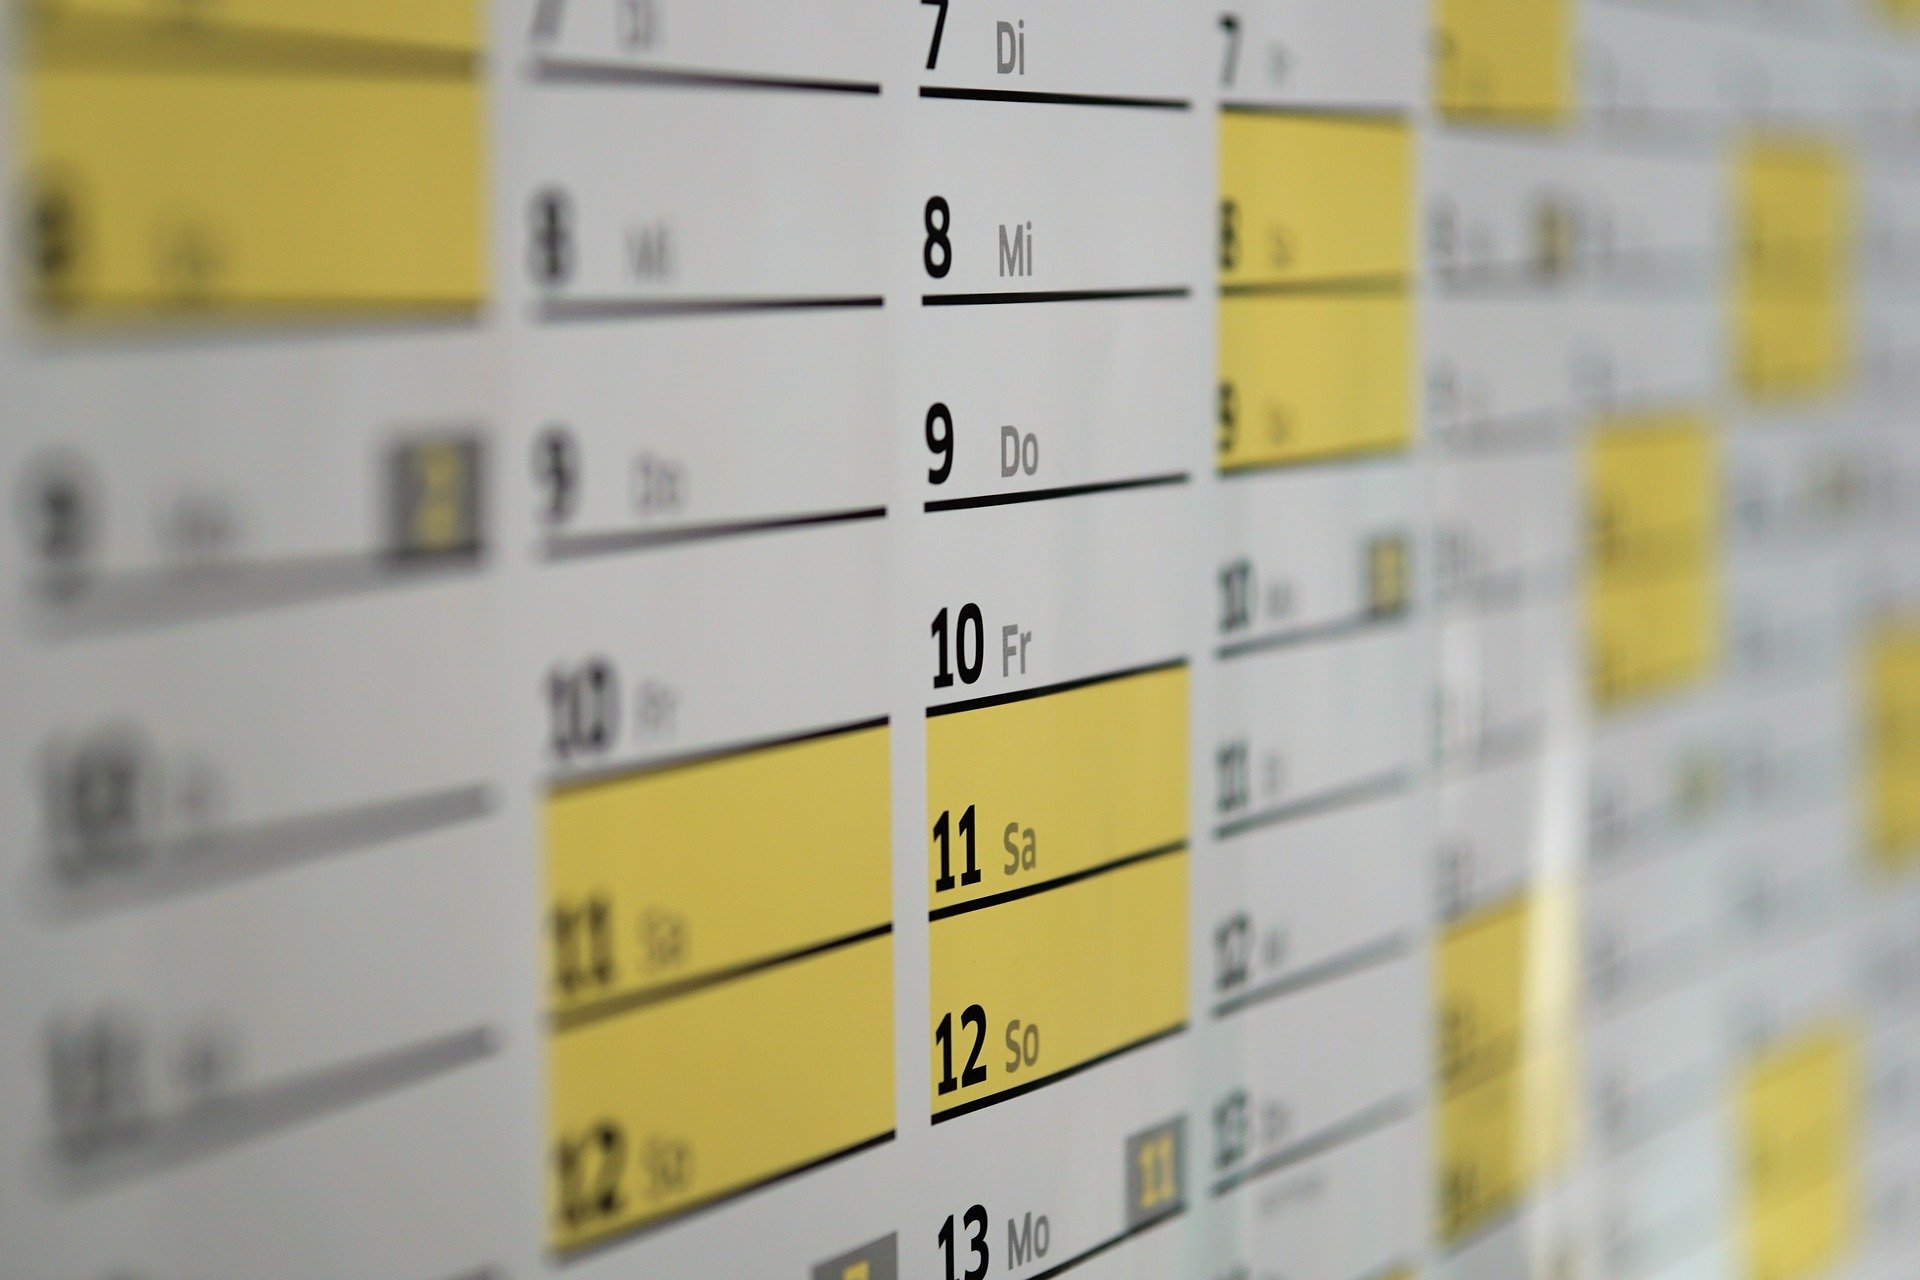 Published the calendar of deadlines for upcoming graduation sessions